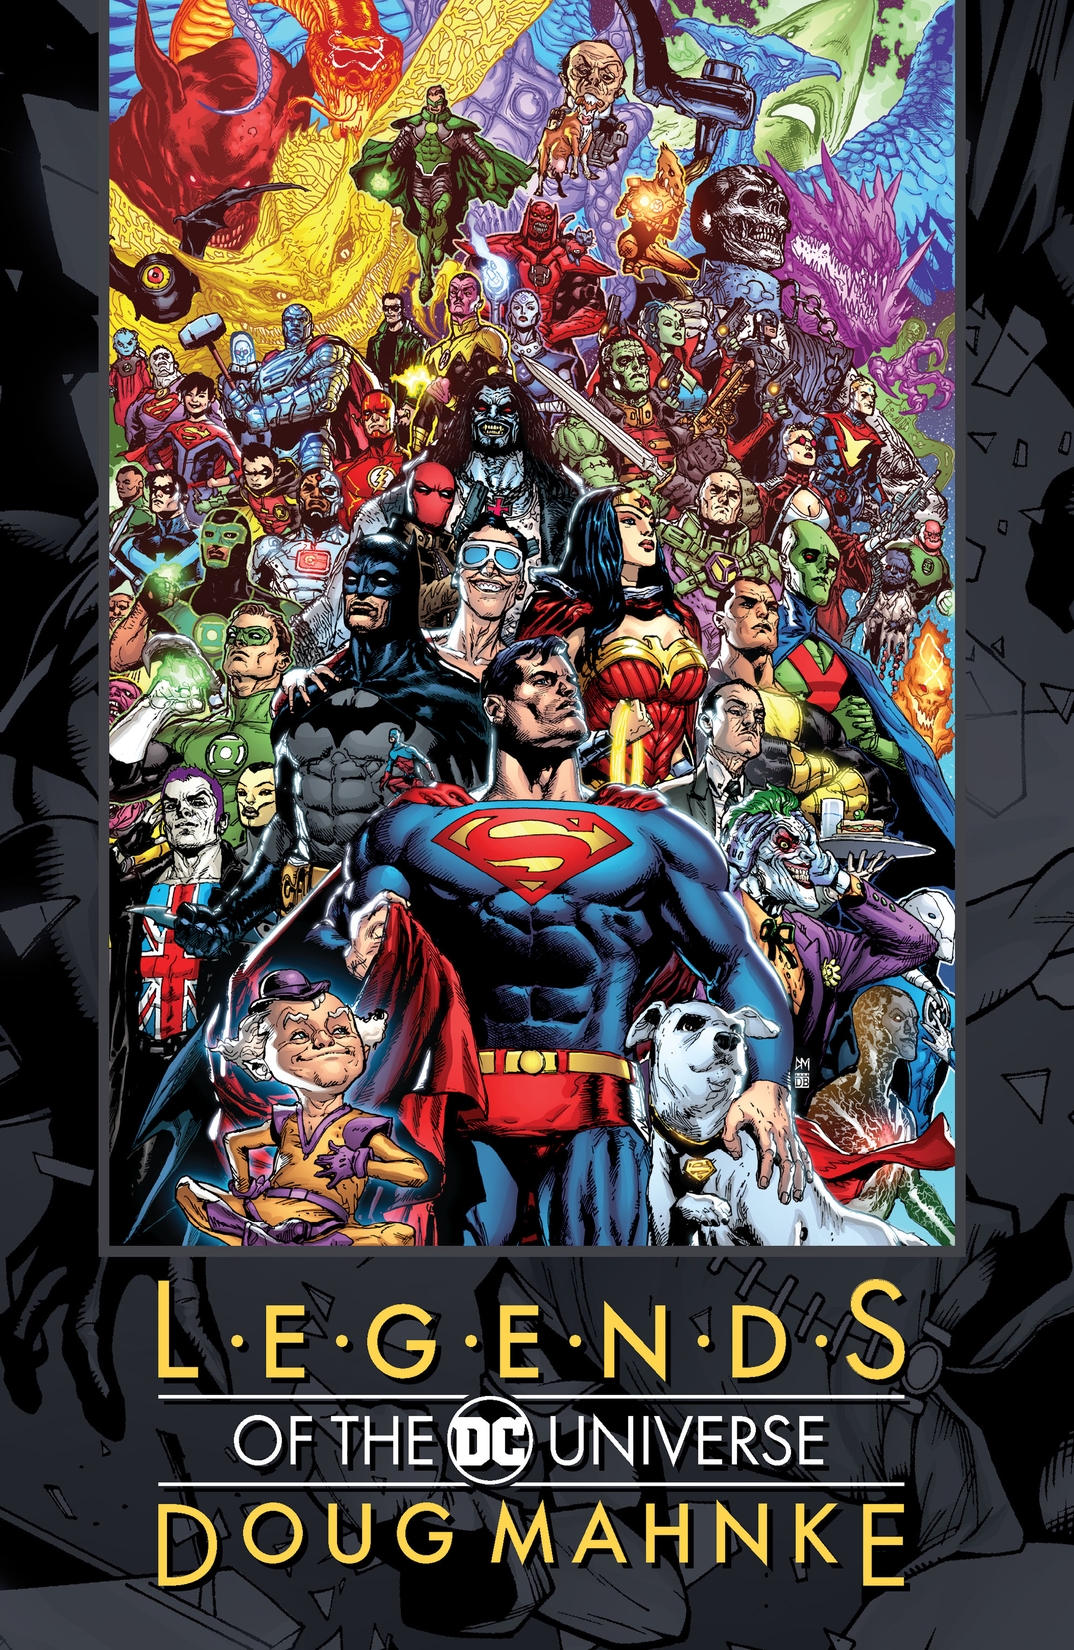 Legends of the DC Universe: Doug Mahnke preview images